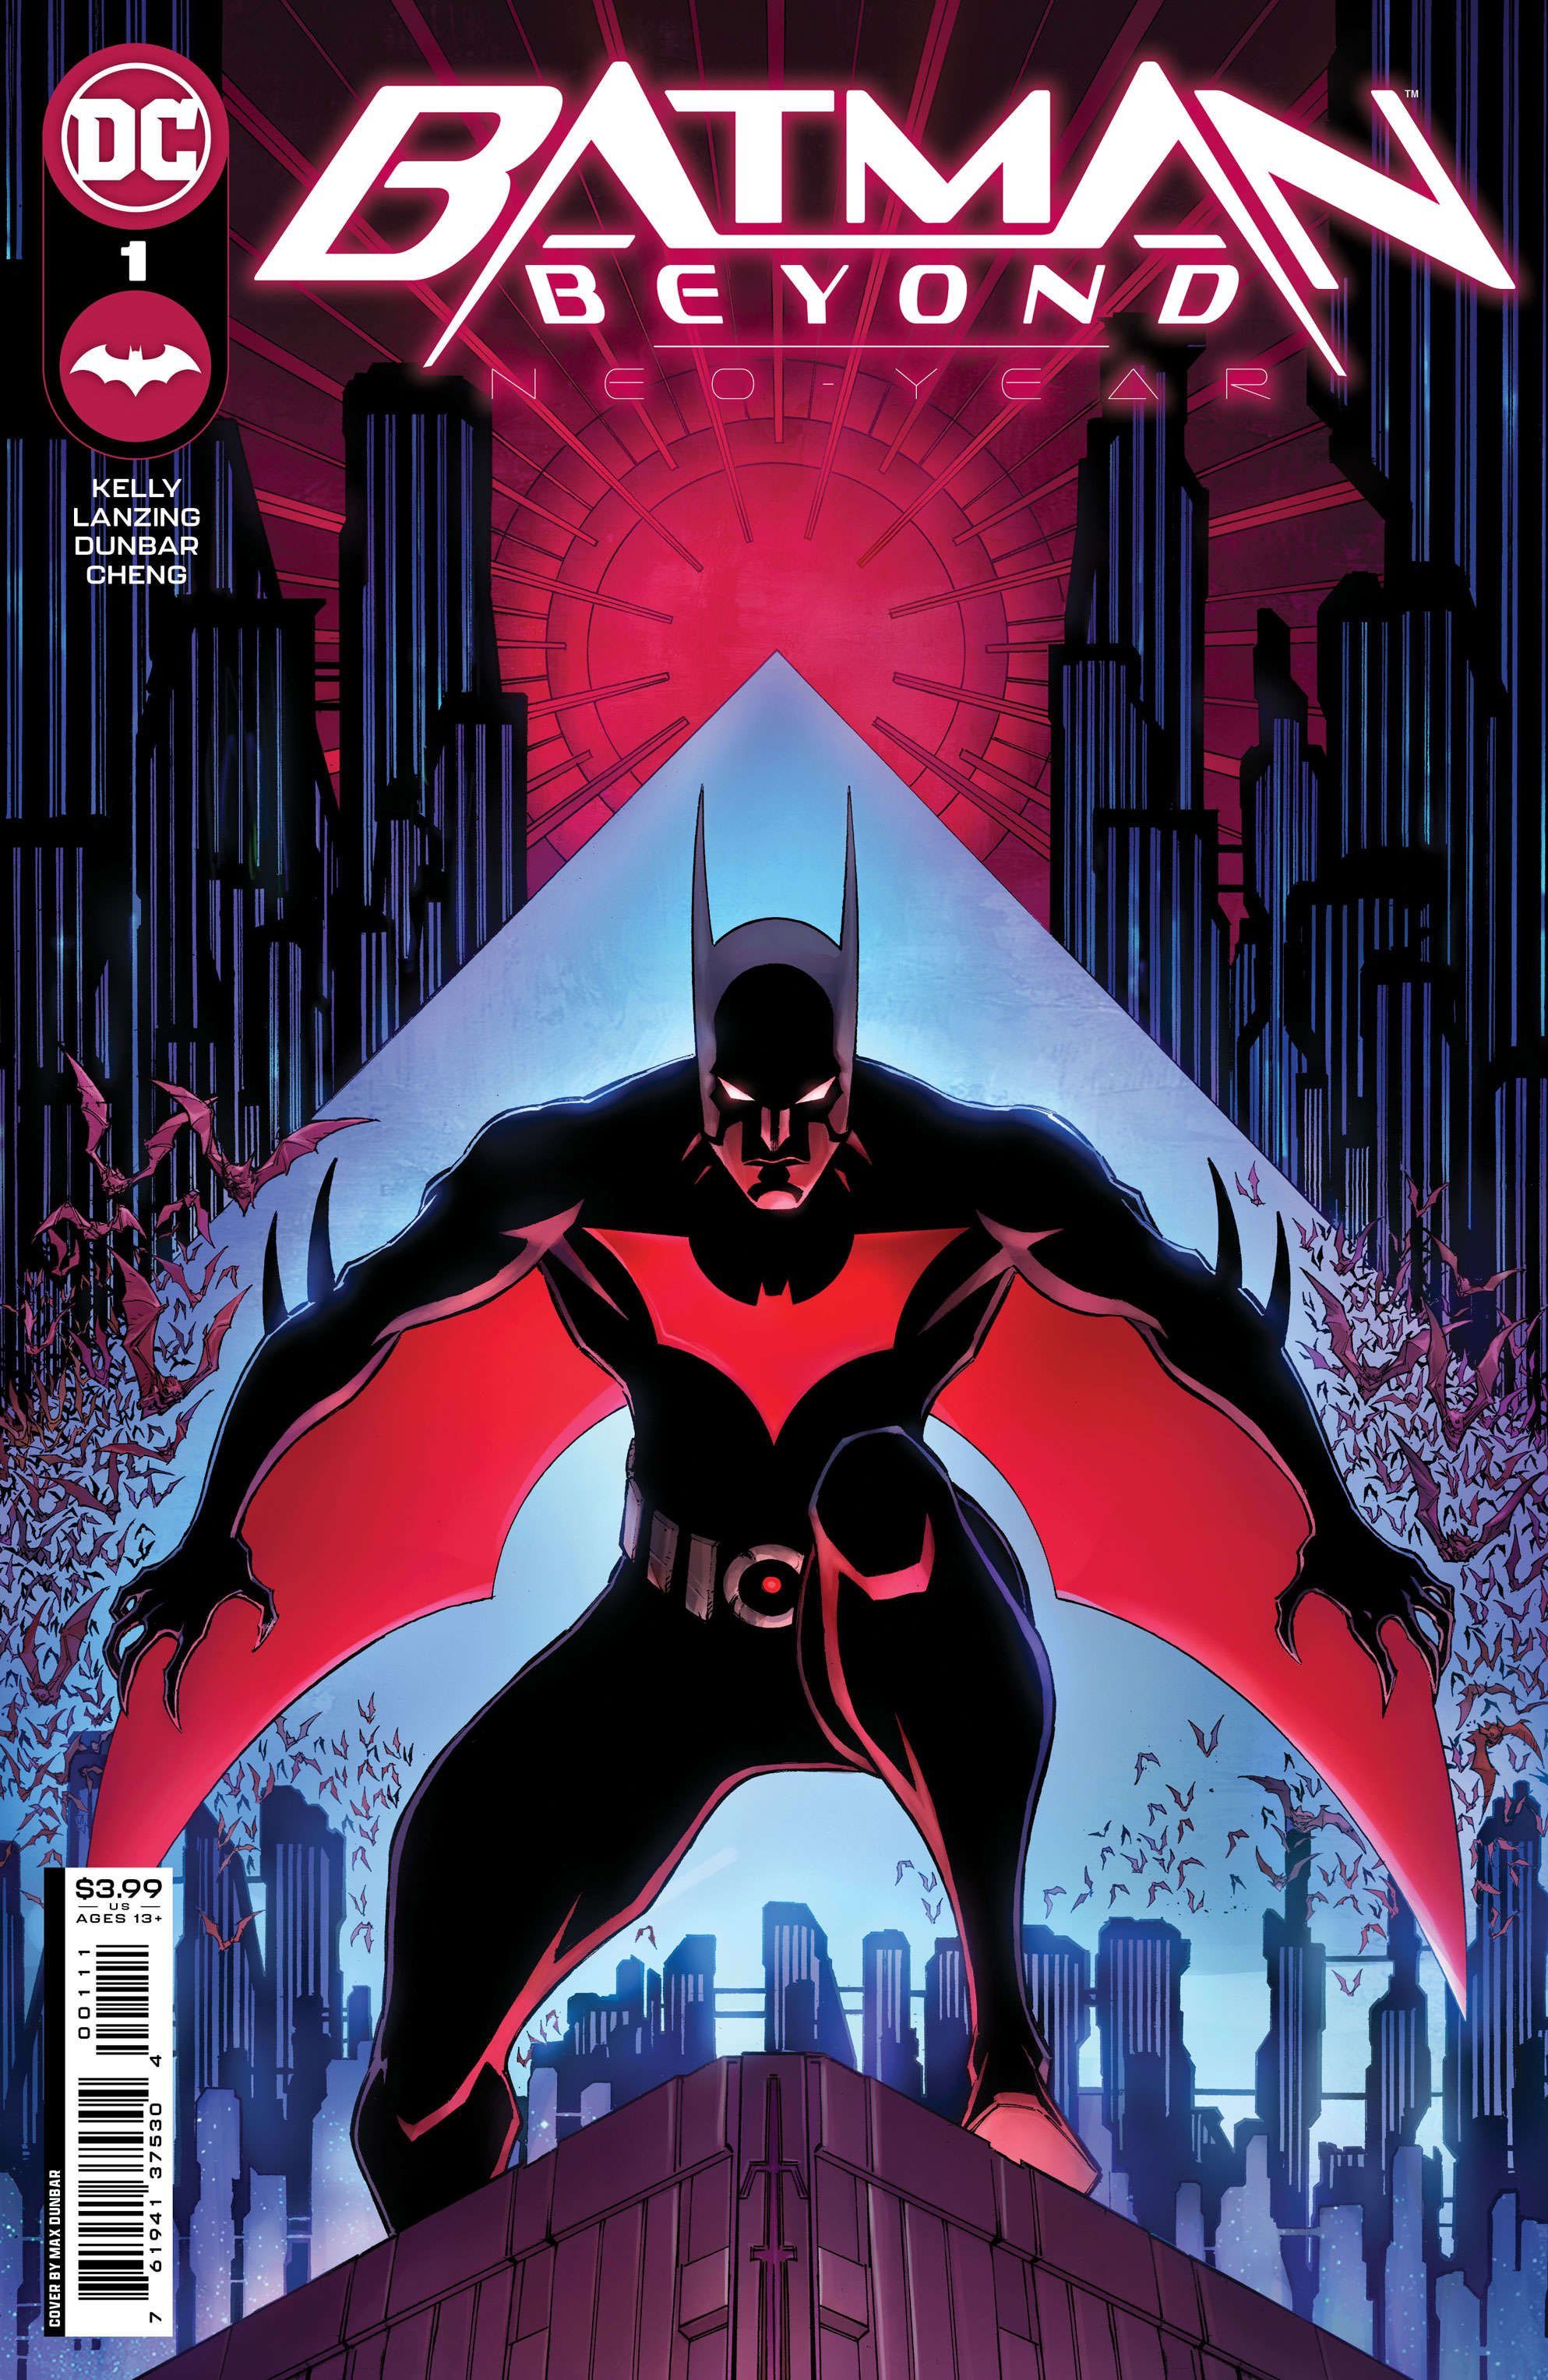 Batman Beyond's 'next chapter' begins with DC Comics' 'NeoYear' in